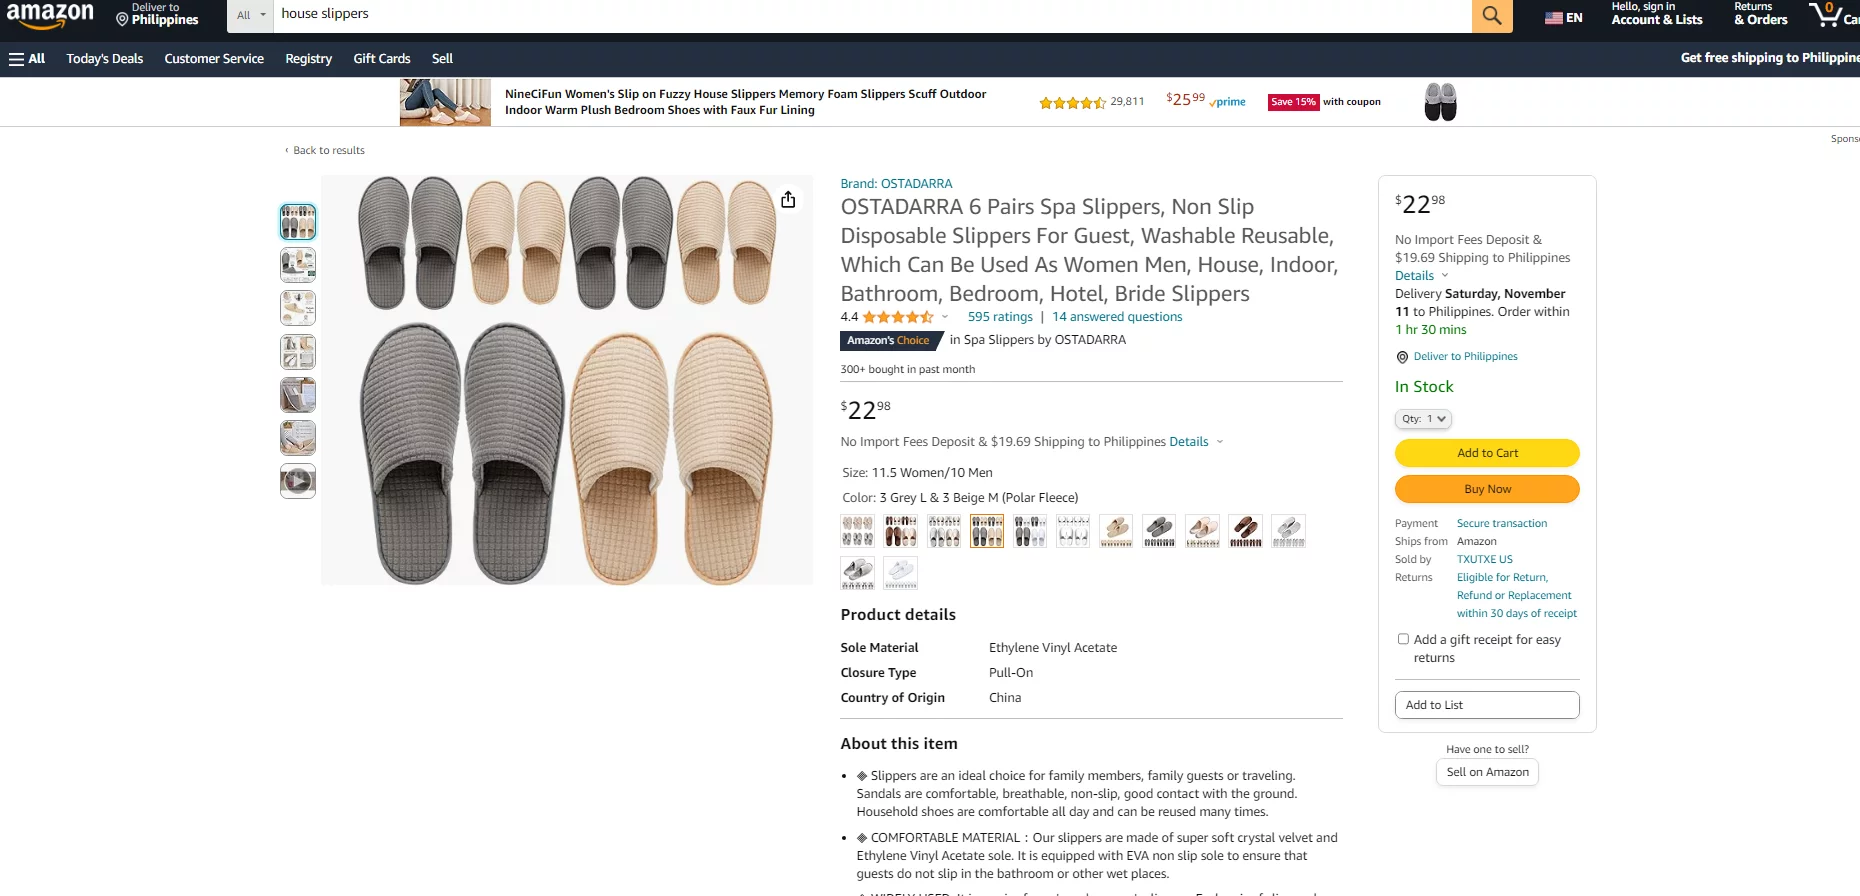 Best Shoes for Dropshipping 5: House Slippers